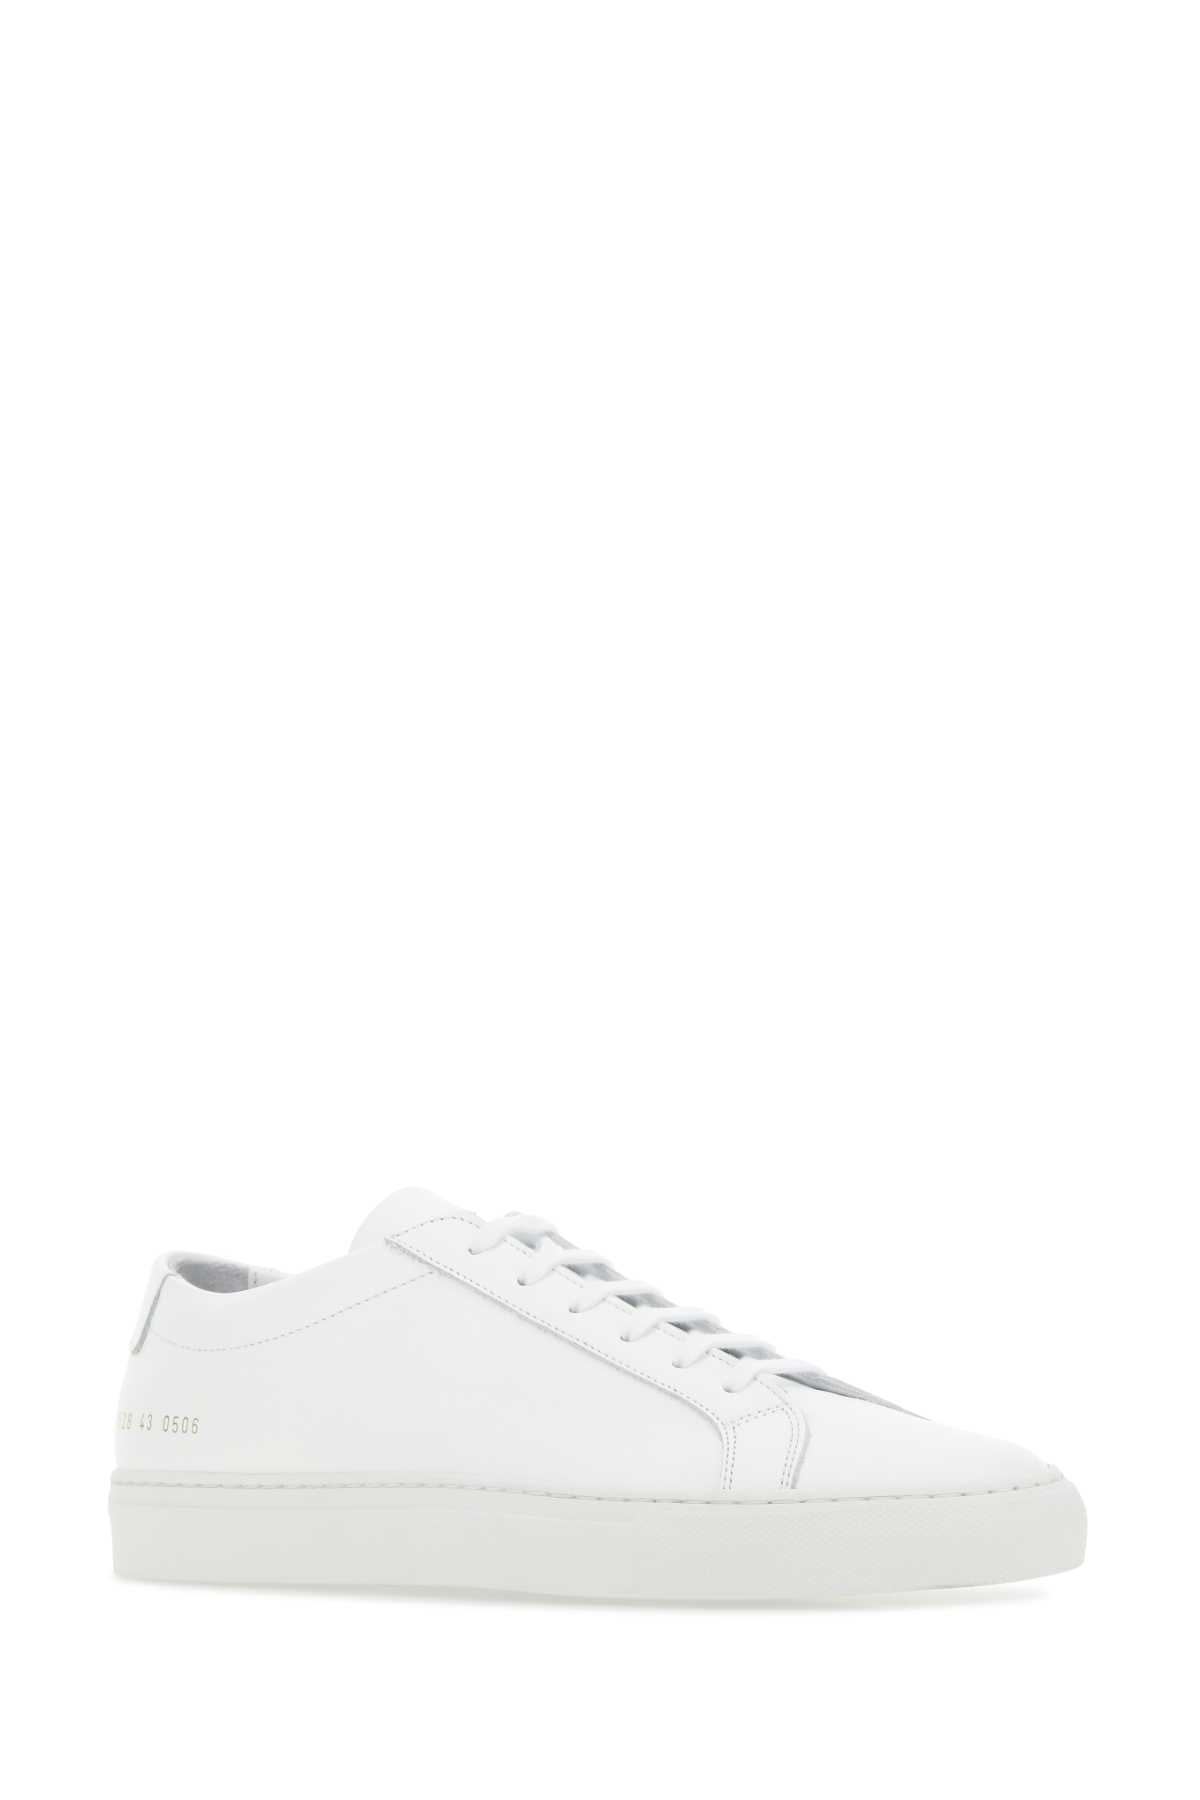 Common Projects White Leather Achilles Sneakers In 0506